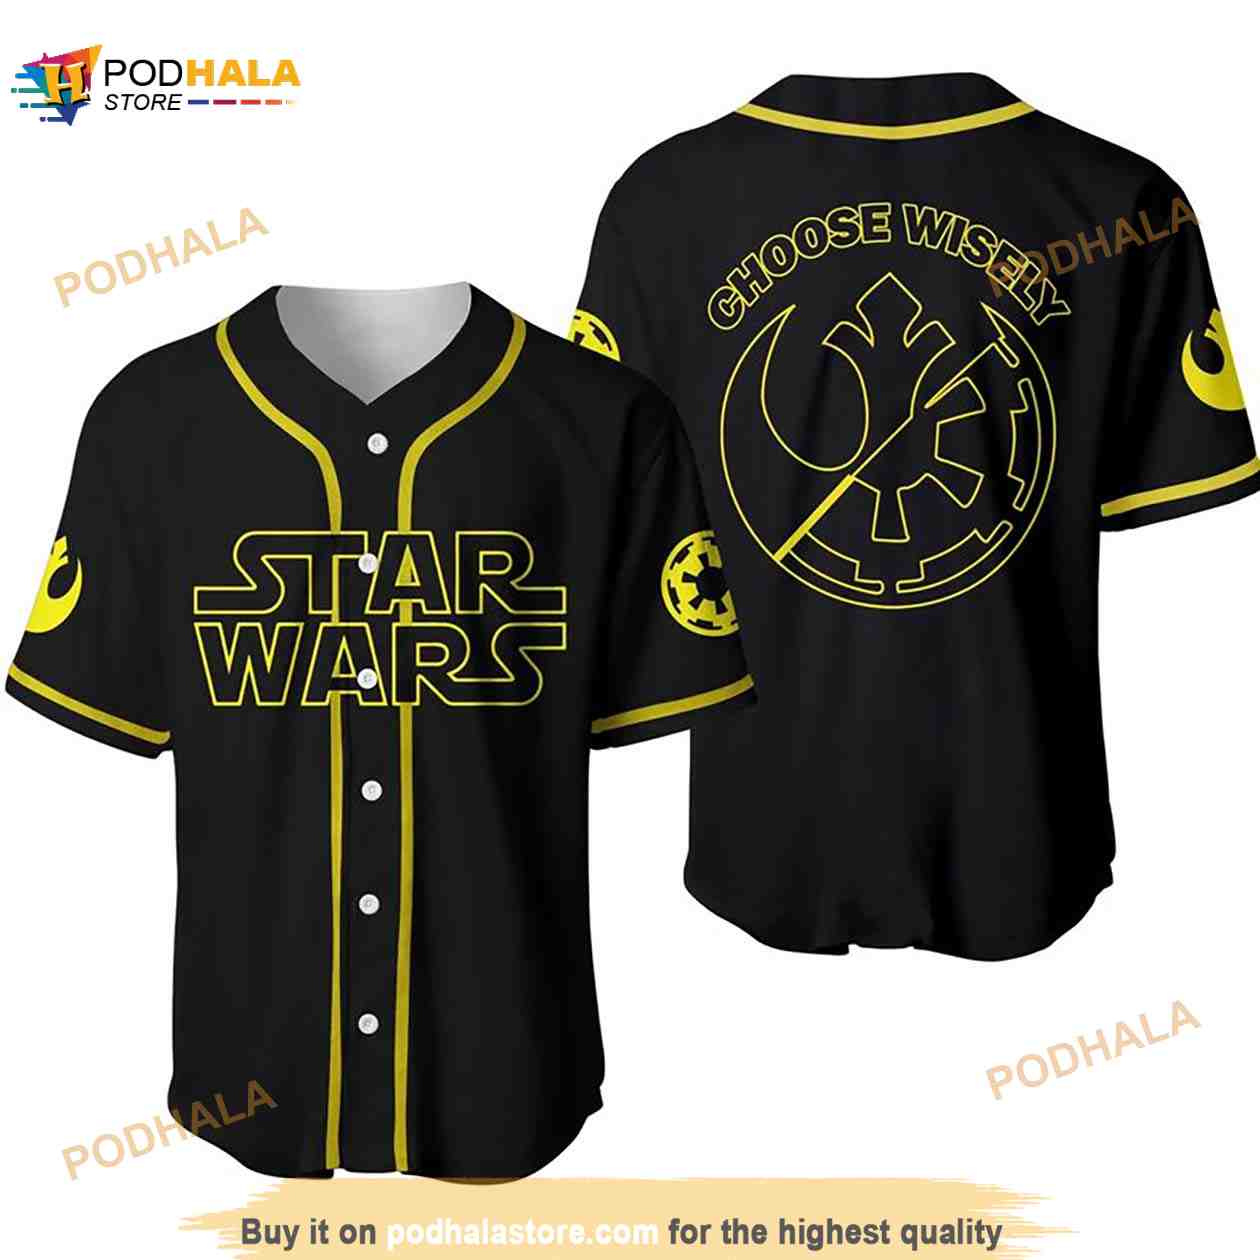 Pittsburgh Pirates 3D Baseball Jersey Personalized Name Number - Bring Your  Ideas, Thoughts And Imaginations Into Reality Today